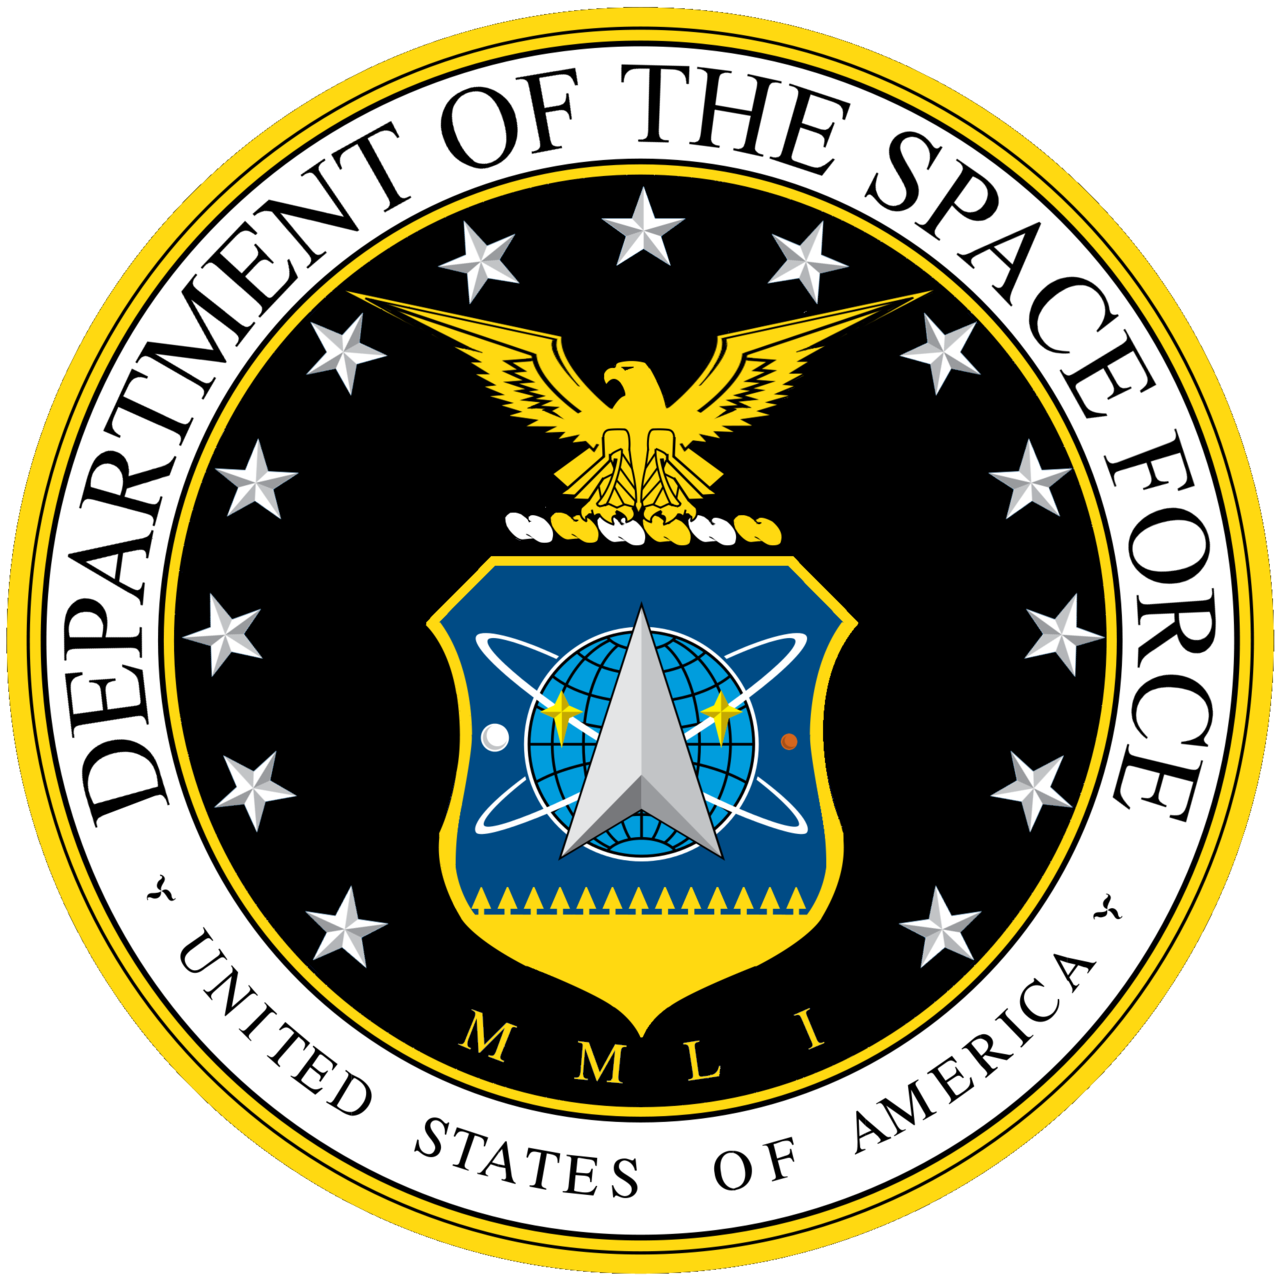 Trump Wants To Add A Space Force To The U S Military The Times In 